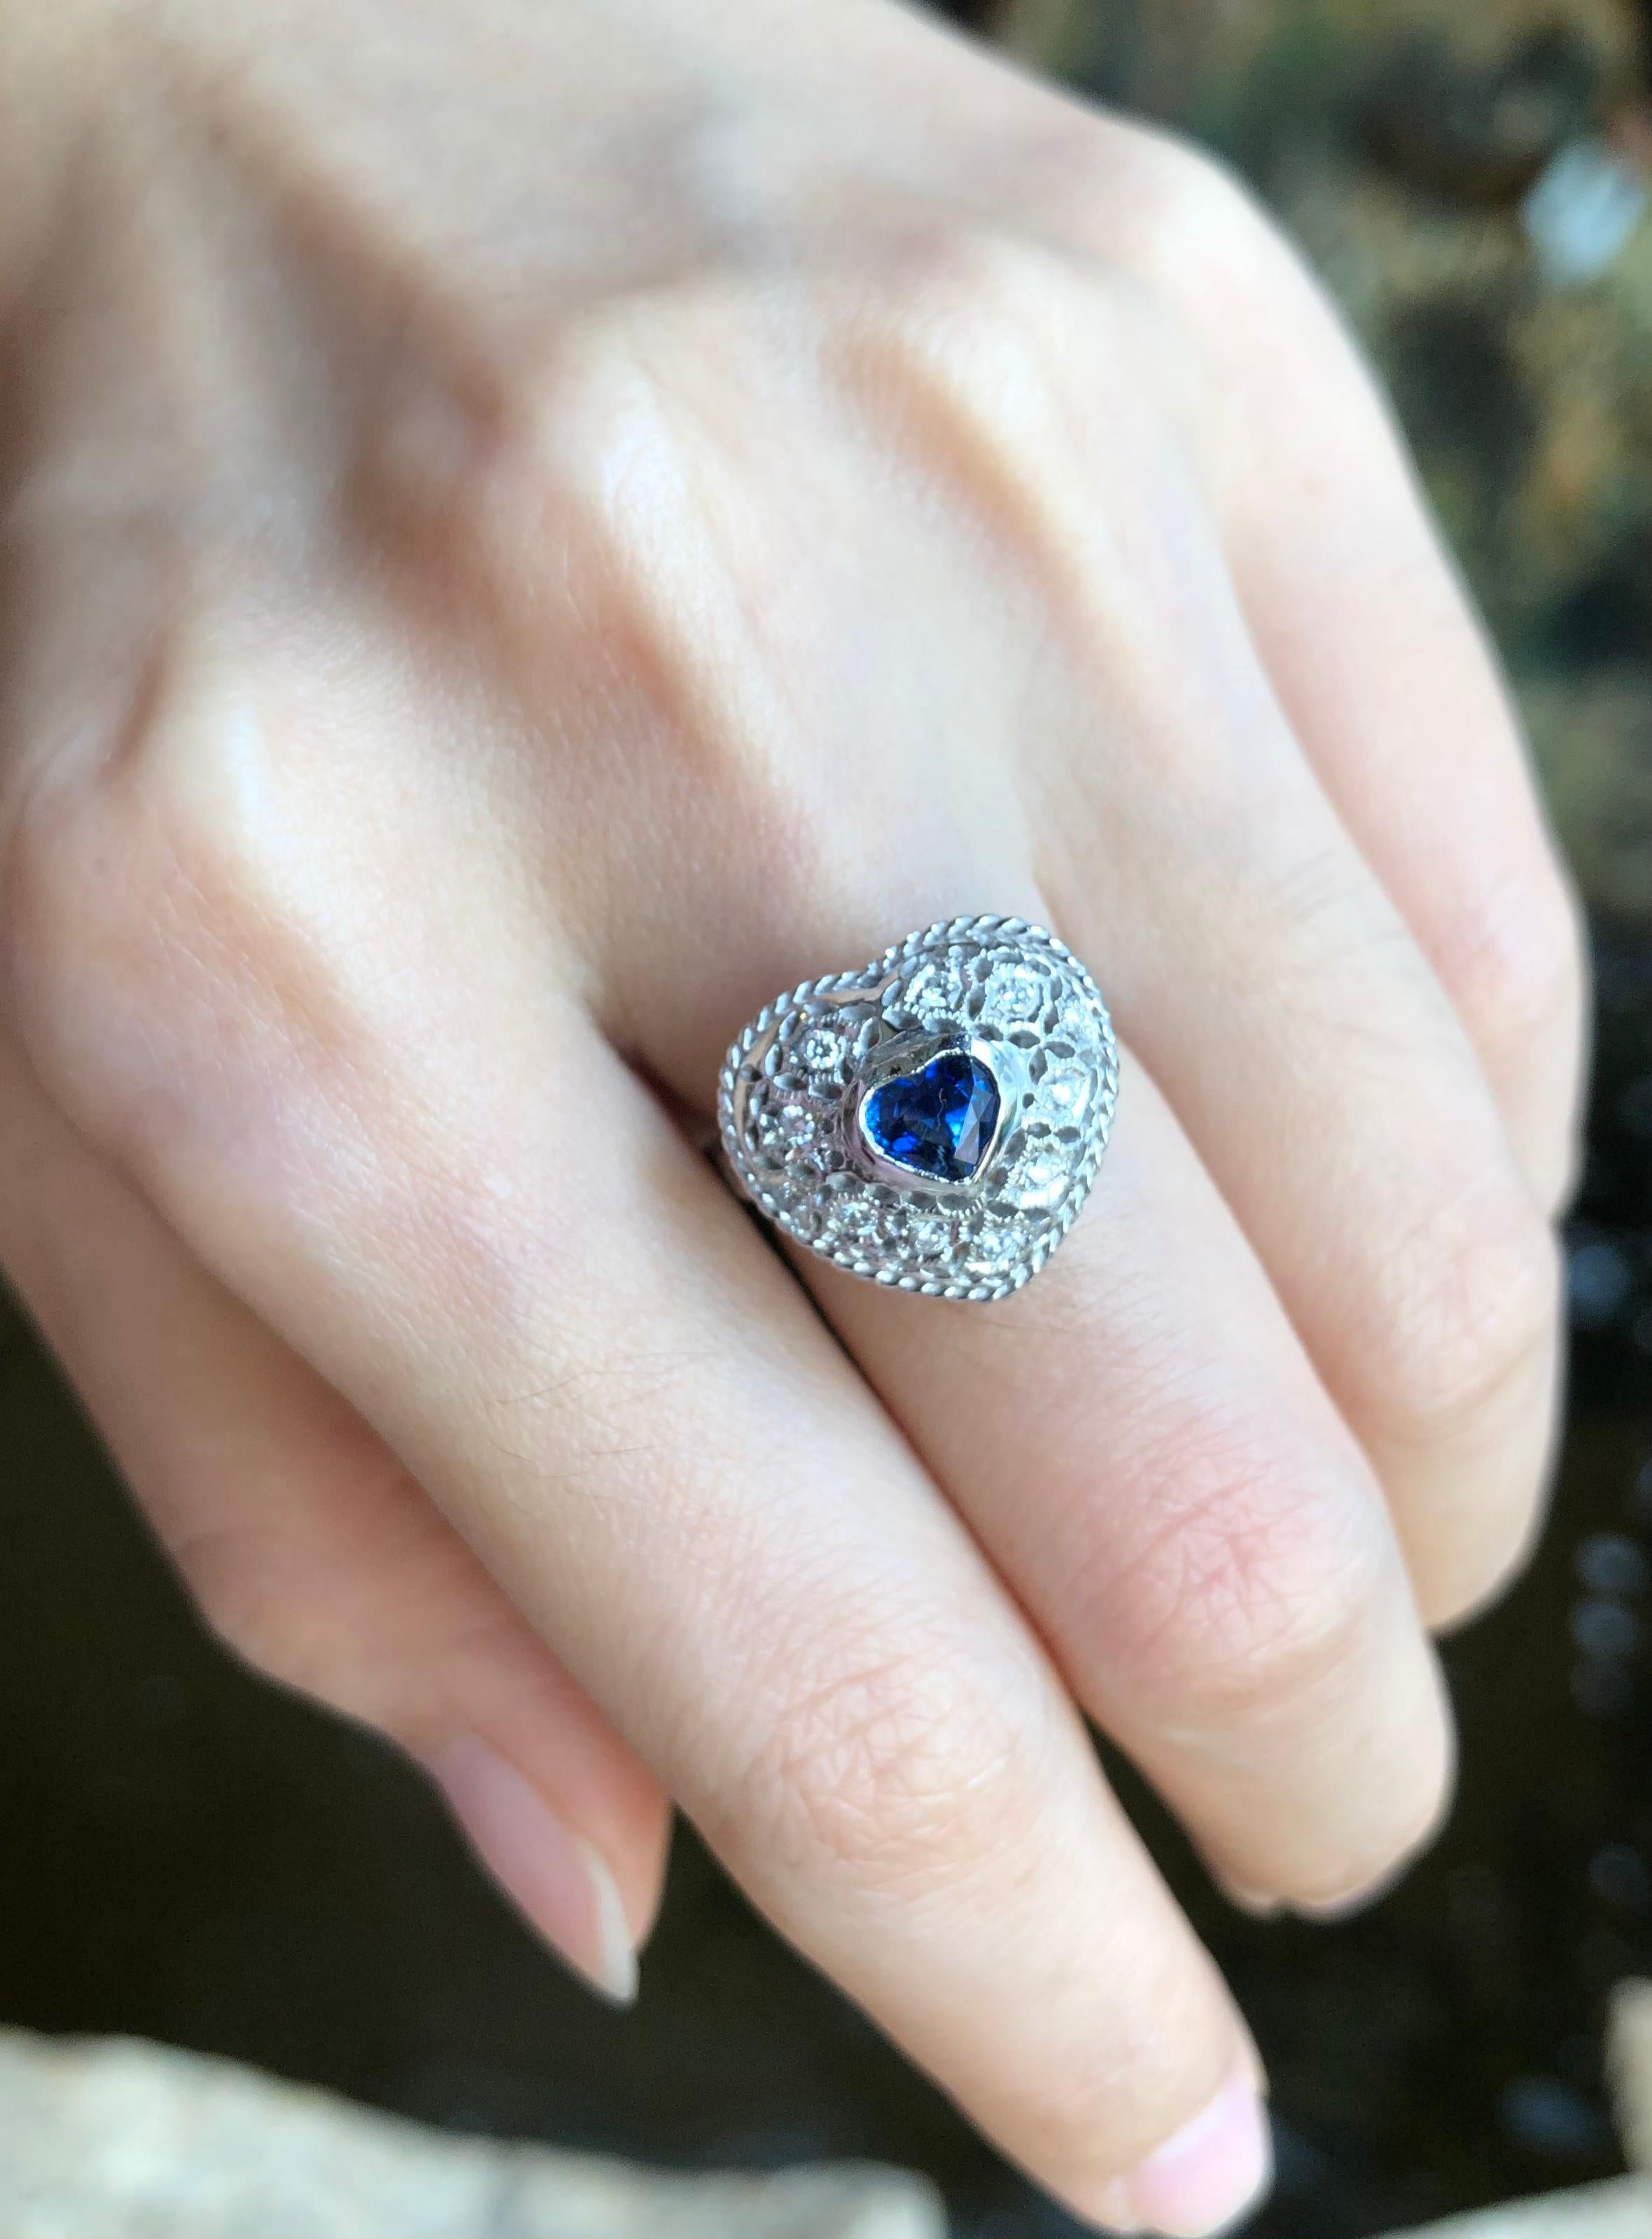 Blue Sapphire 0.50 carat with Diamond 0.12 carat Ring set in 18 Karat White Gold Settings

Width:  1.5 cm 
Length: 1.45 cm
Ring Size: 49
Total Weight: 6.14 grams

